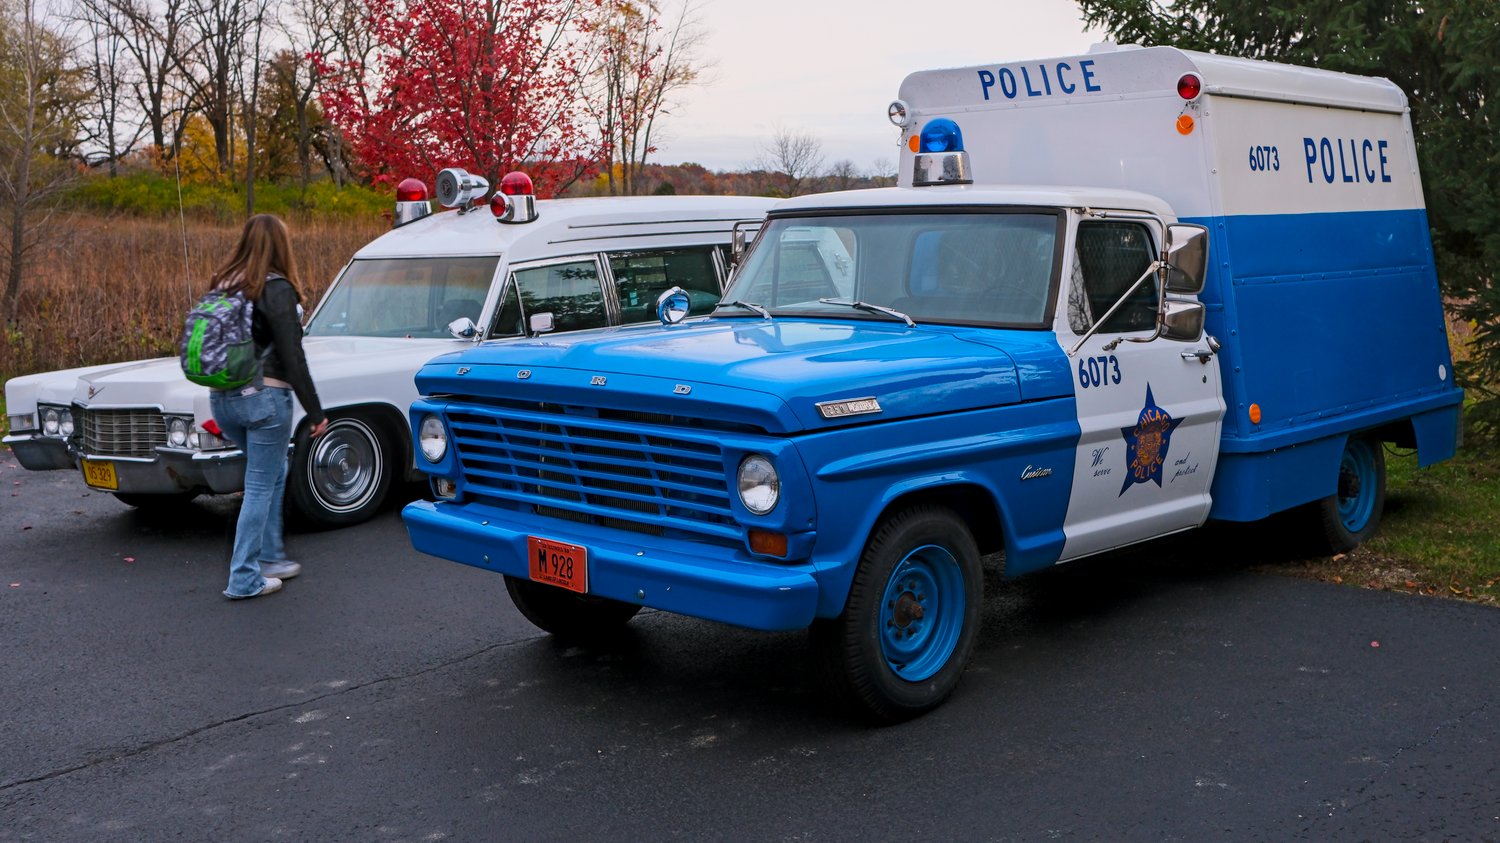 Antique police truck and ambulance.